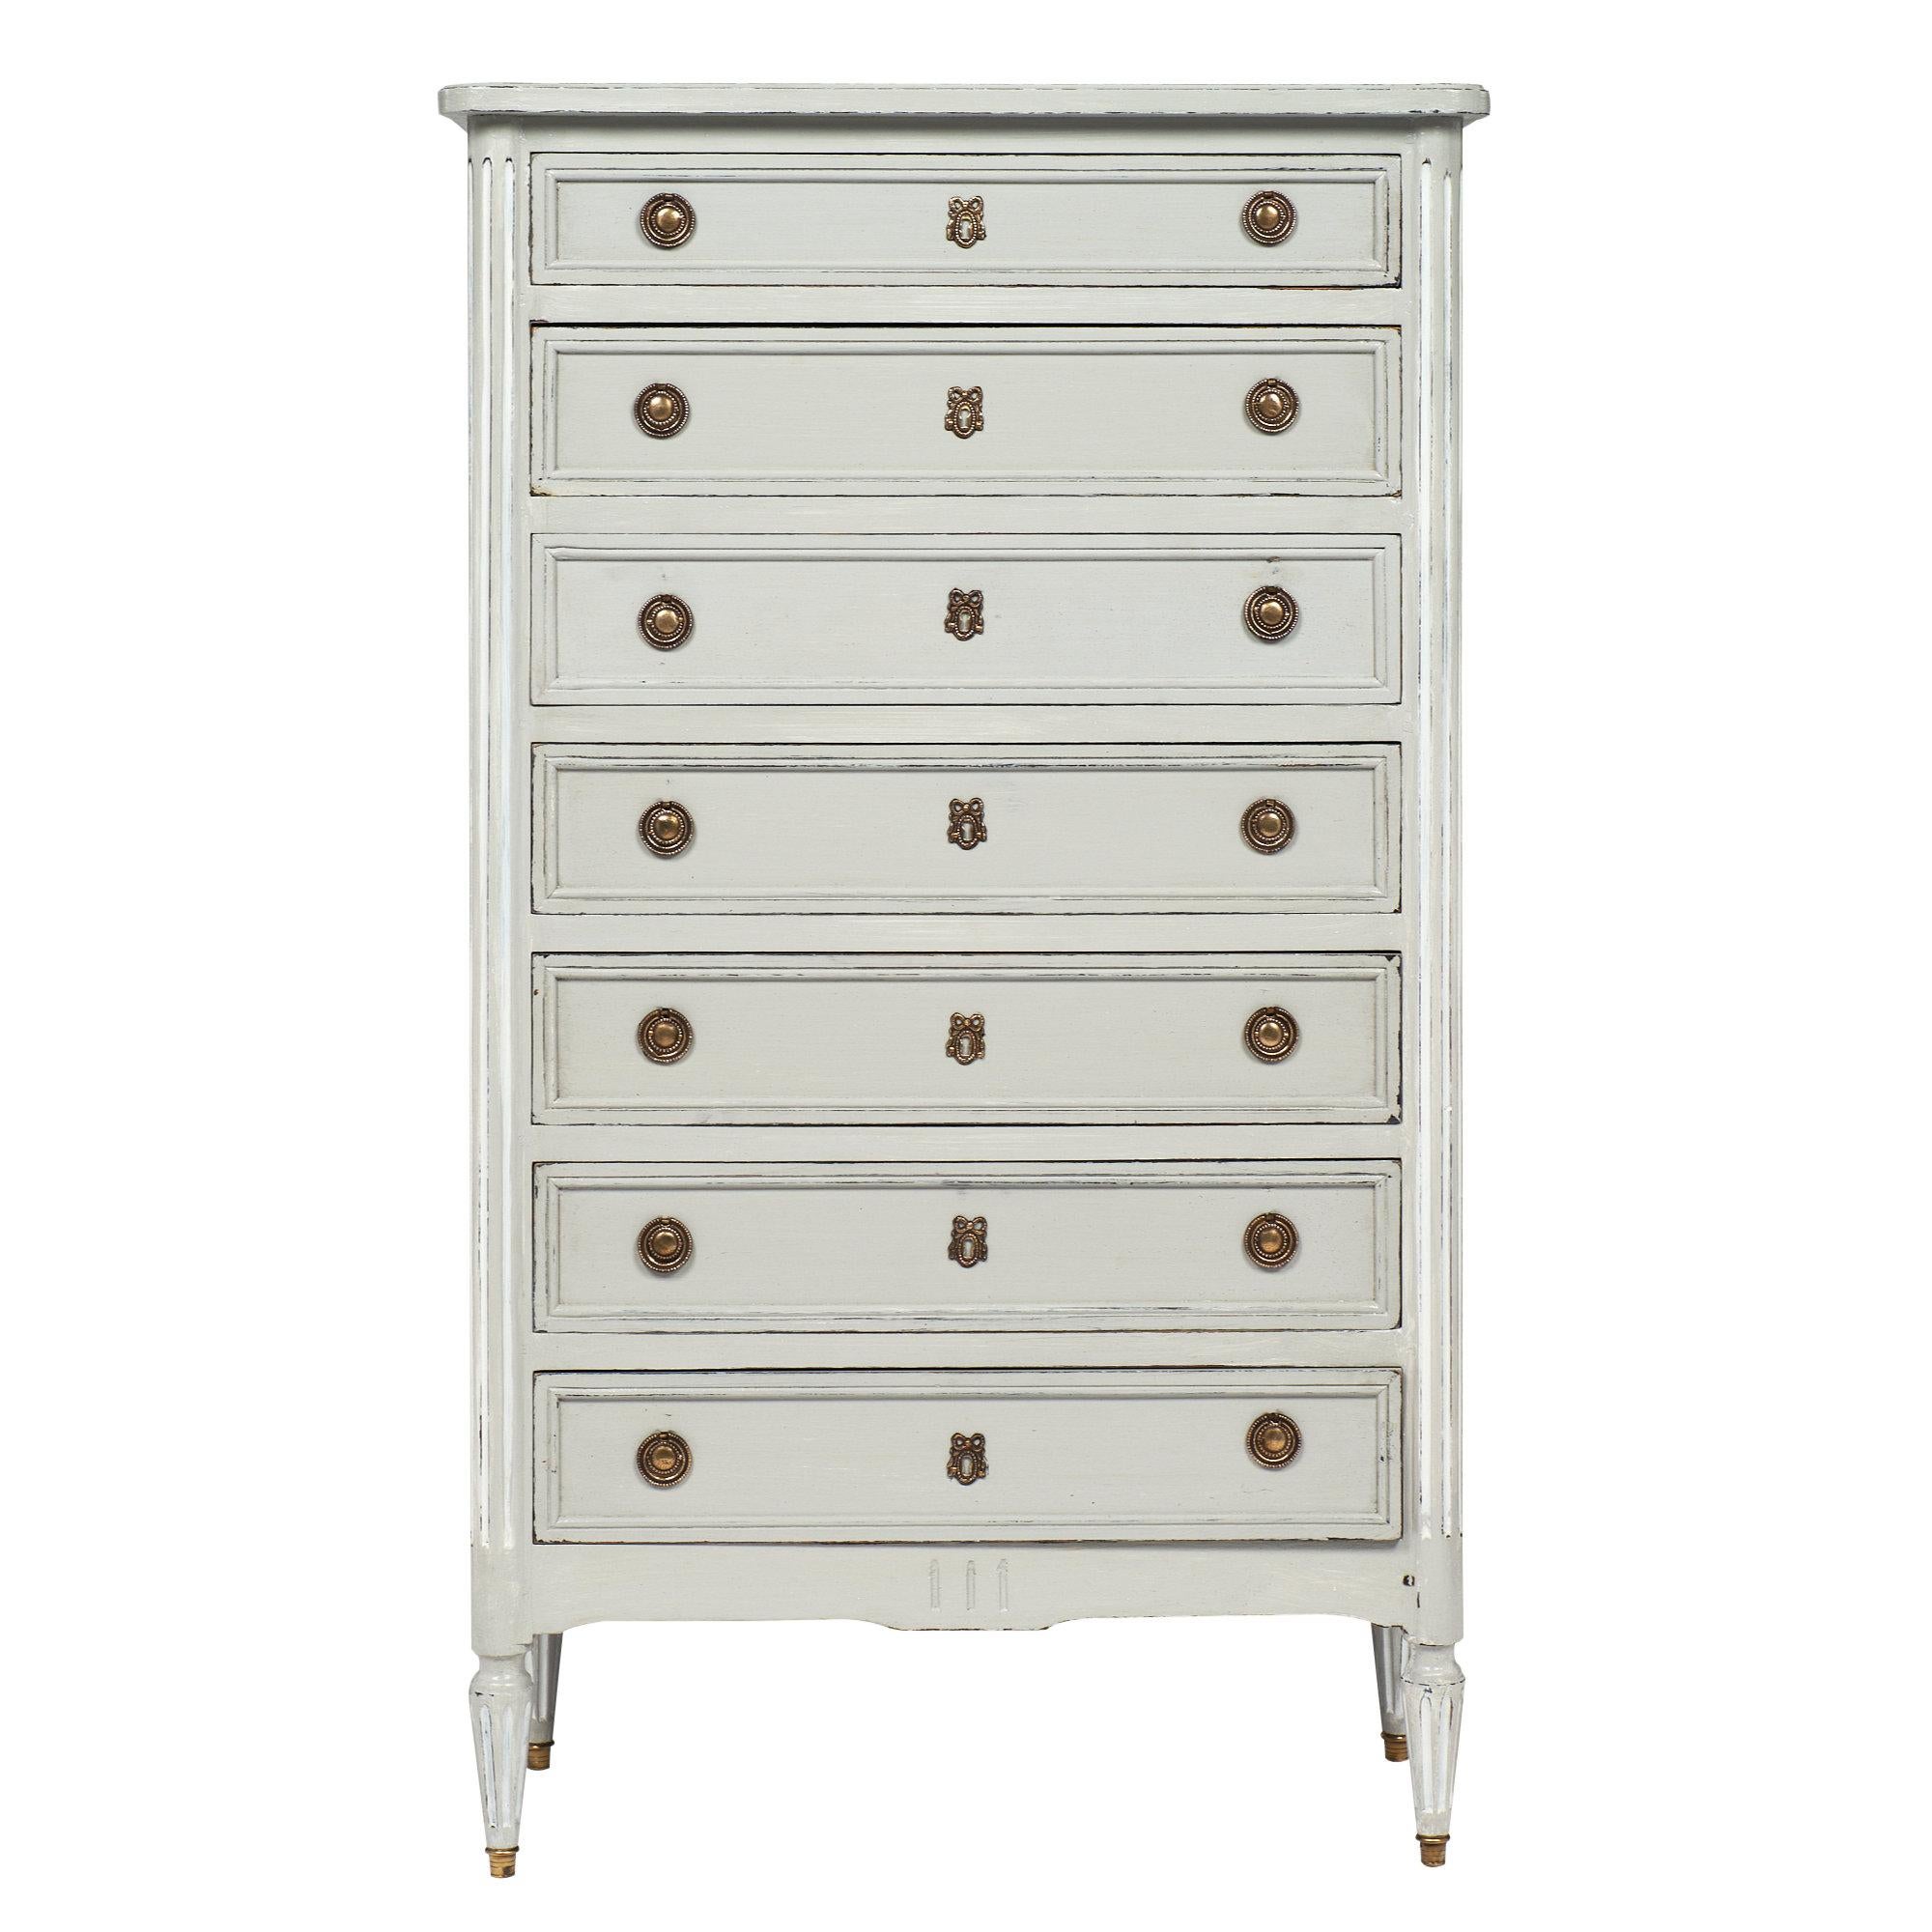 Painted French Antique Semainier